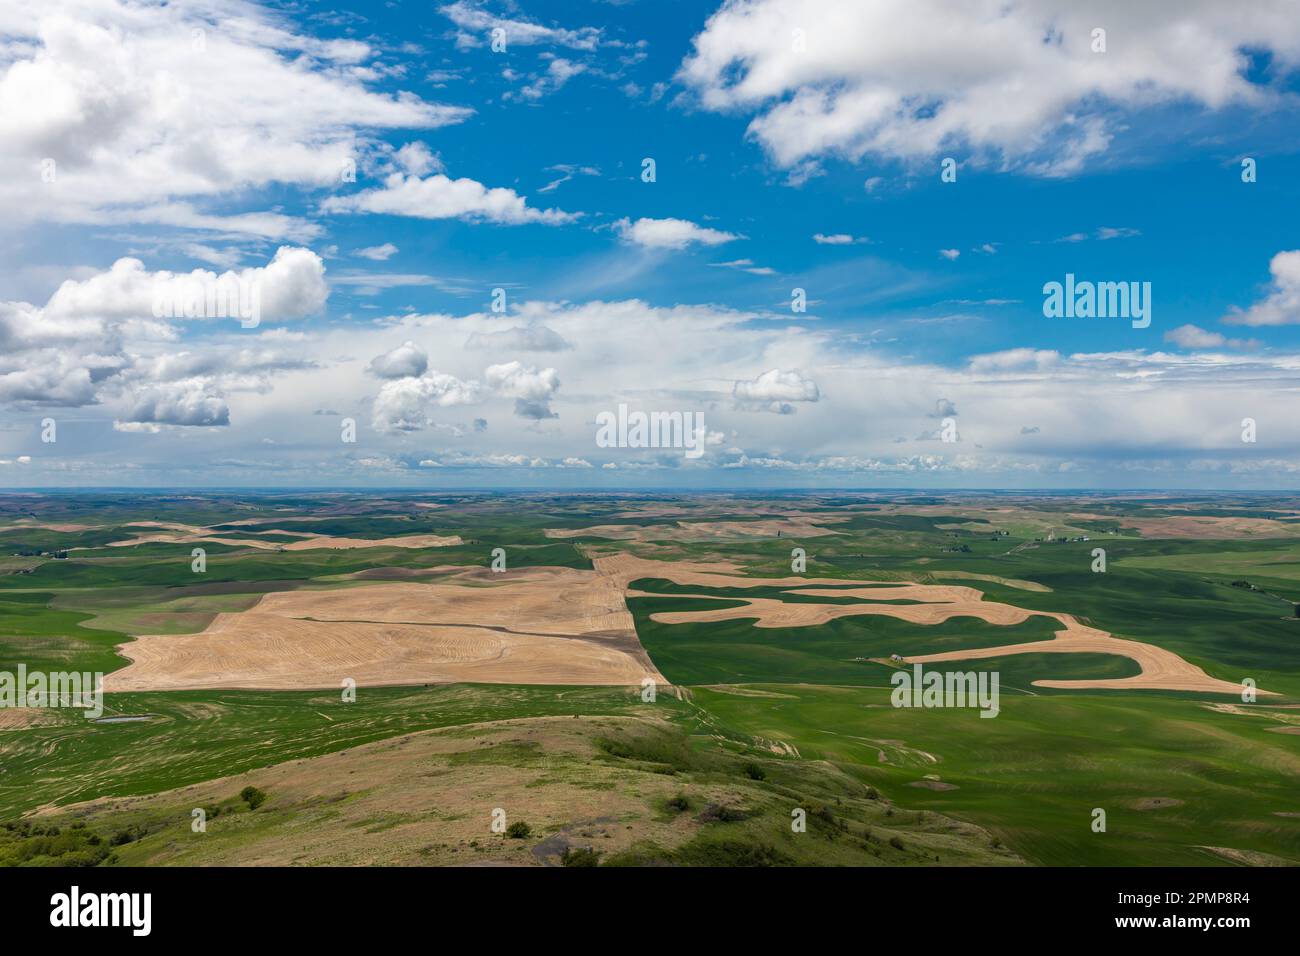 View of the vast landscape on a beautiful spring day overlooking the fertile agricultural fields of the Palouse area from Steptoe Butte State Park ... Stock Photo